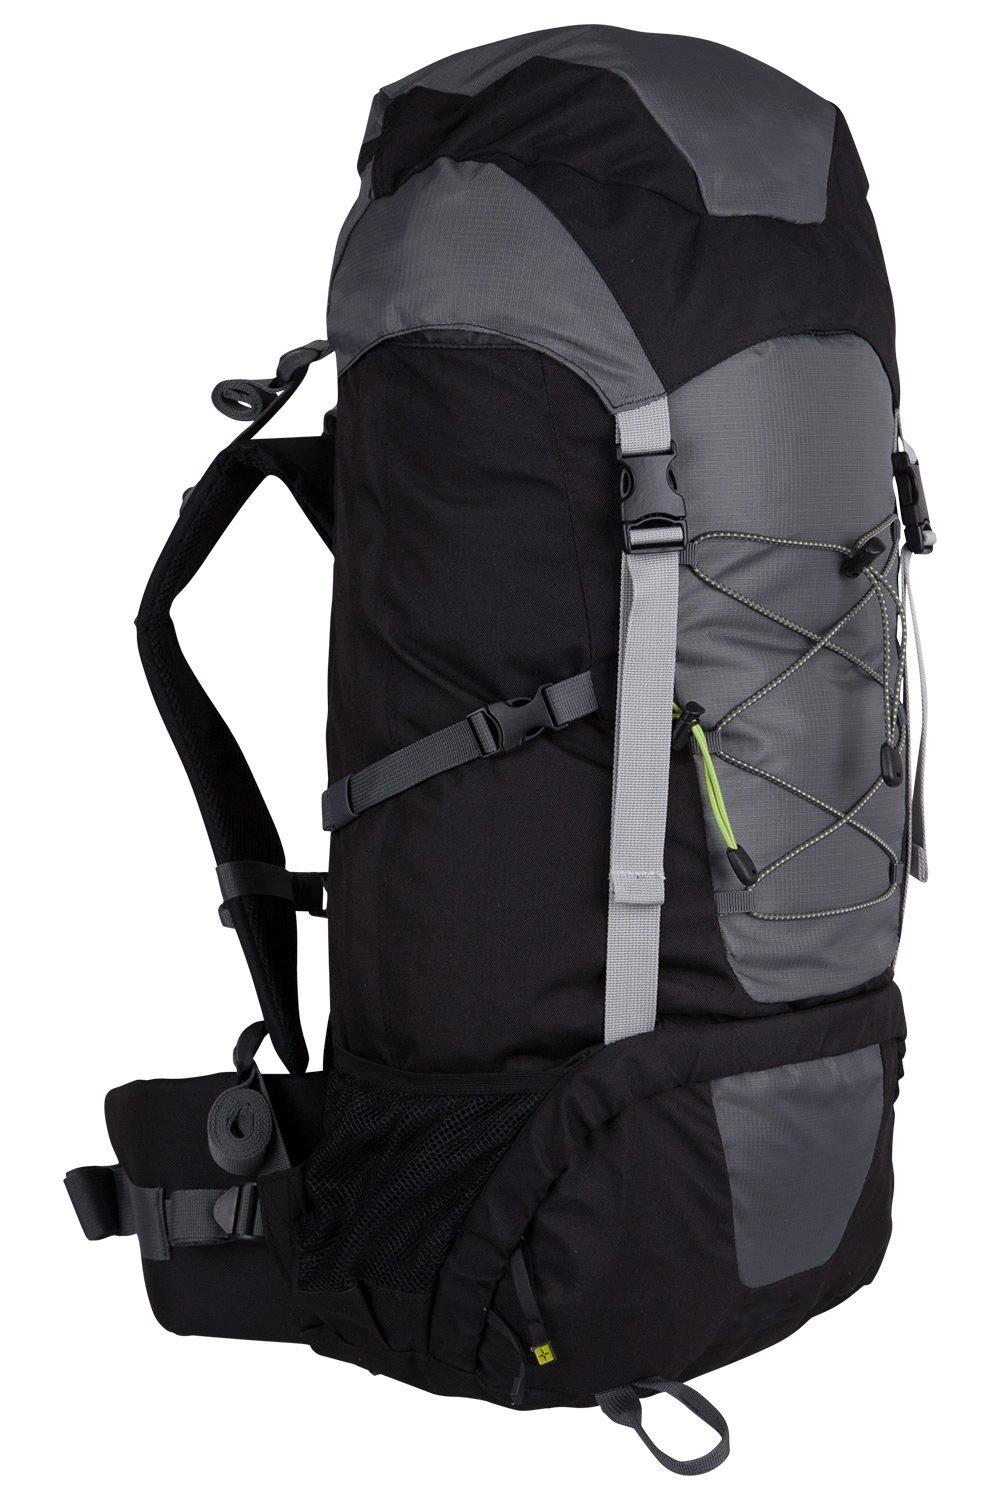 55L Internal Frame Outdoor Hiking Backpack with Rain Cover Rucksack